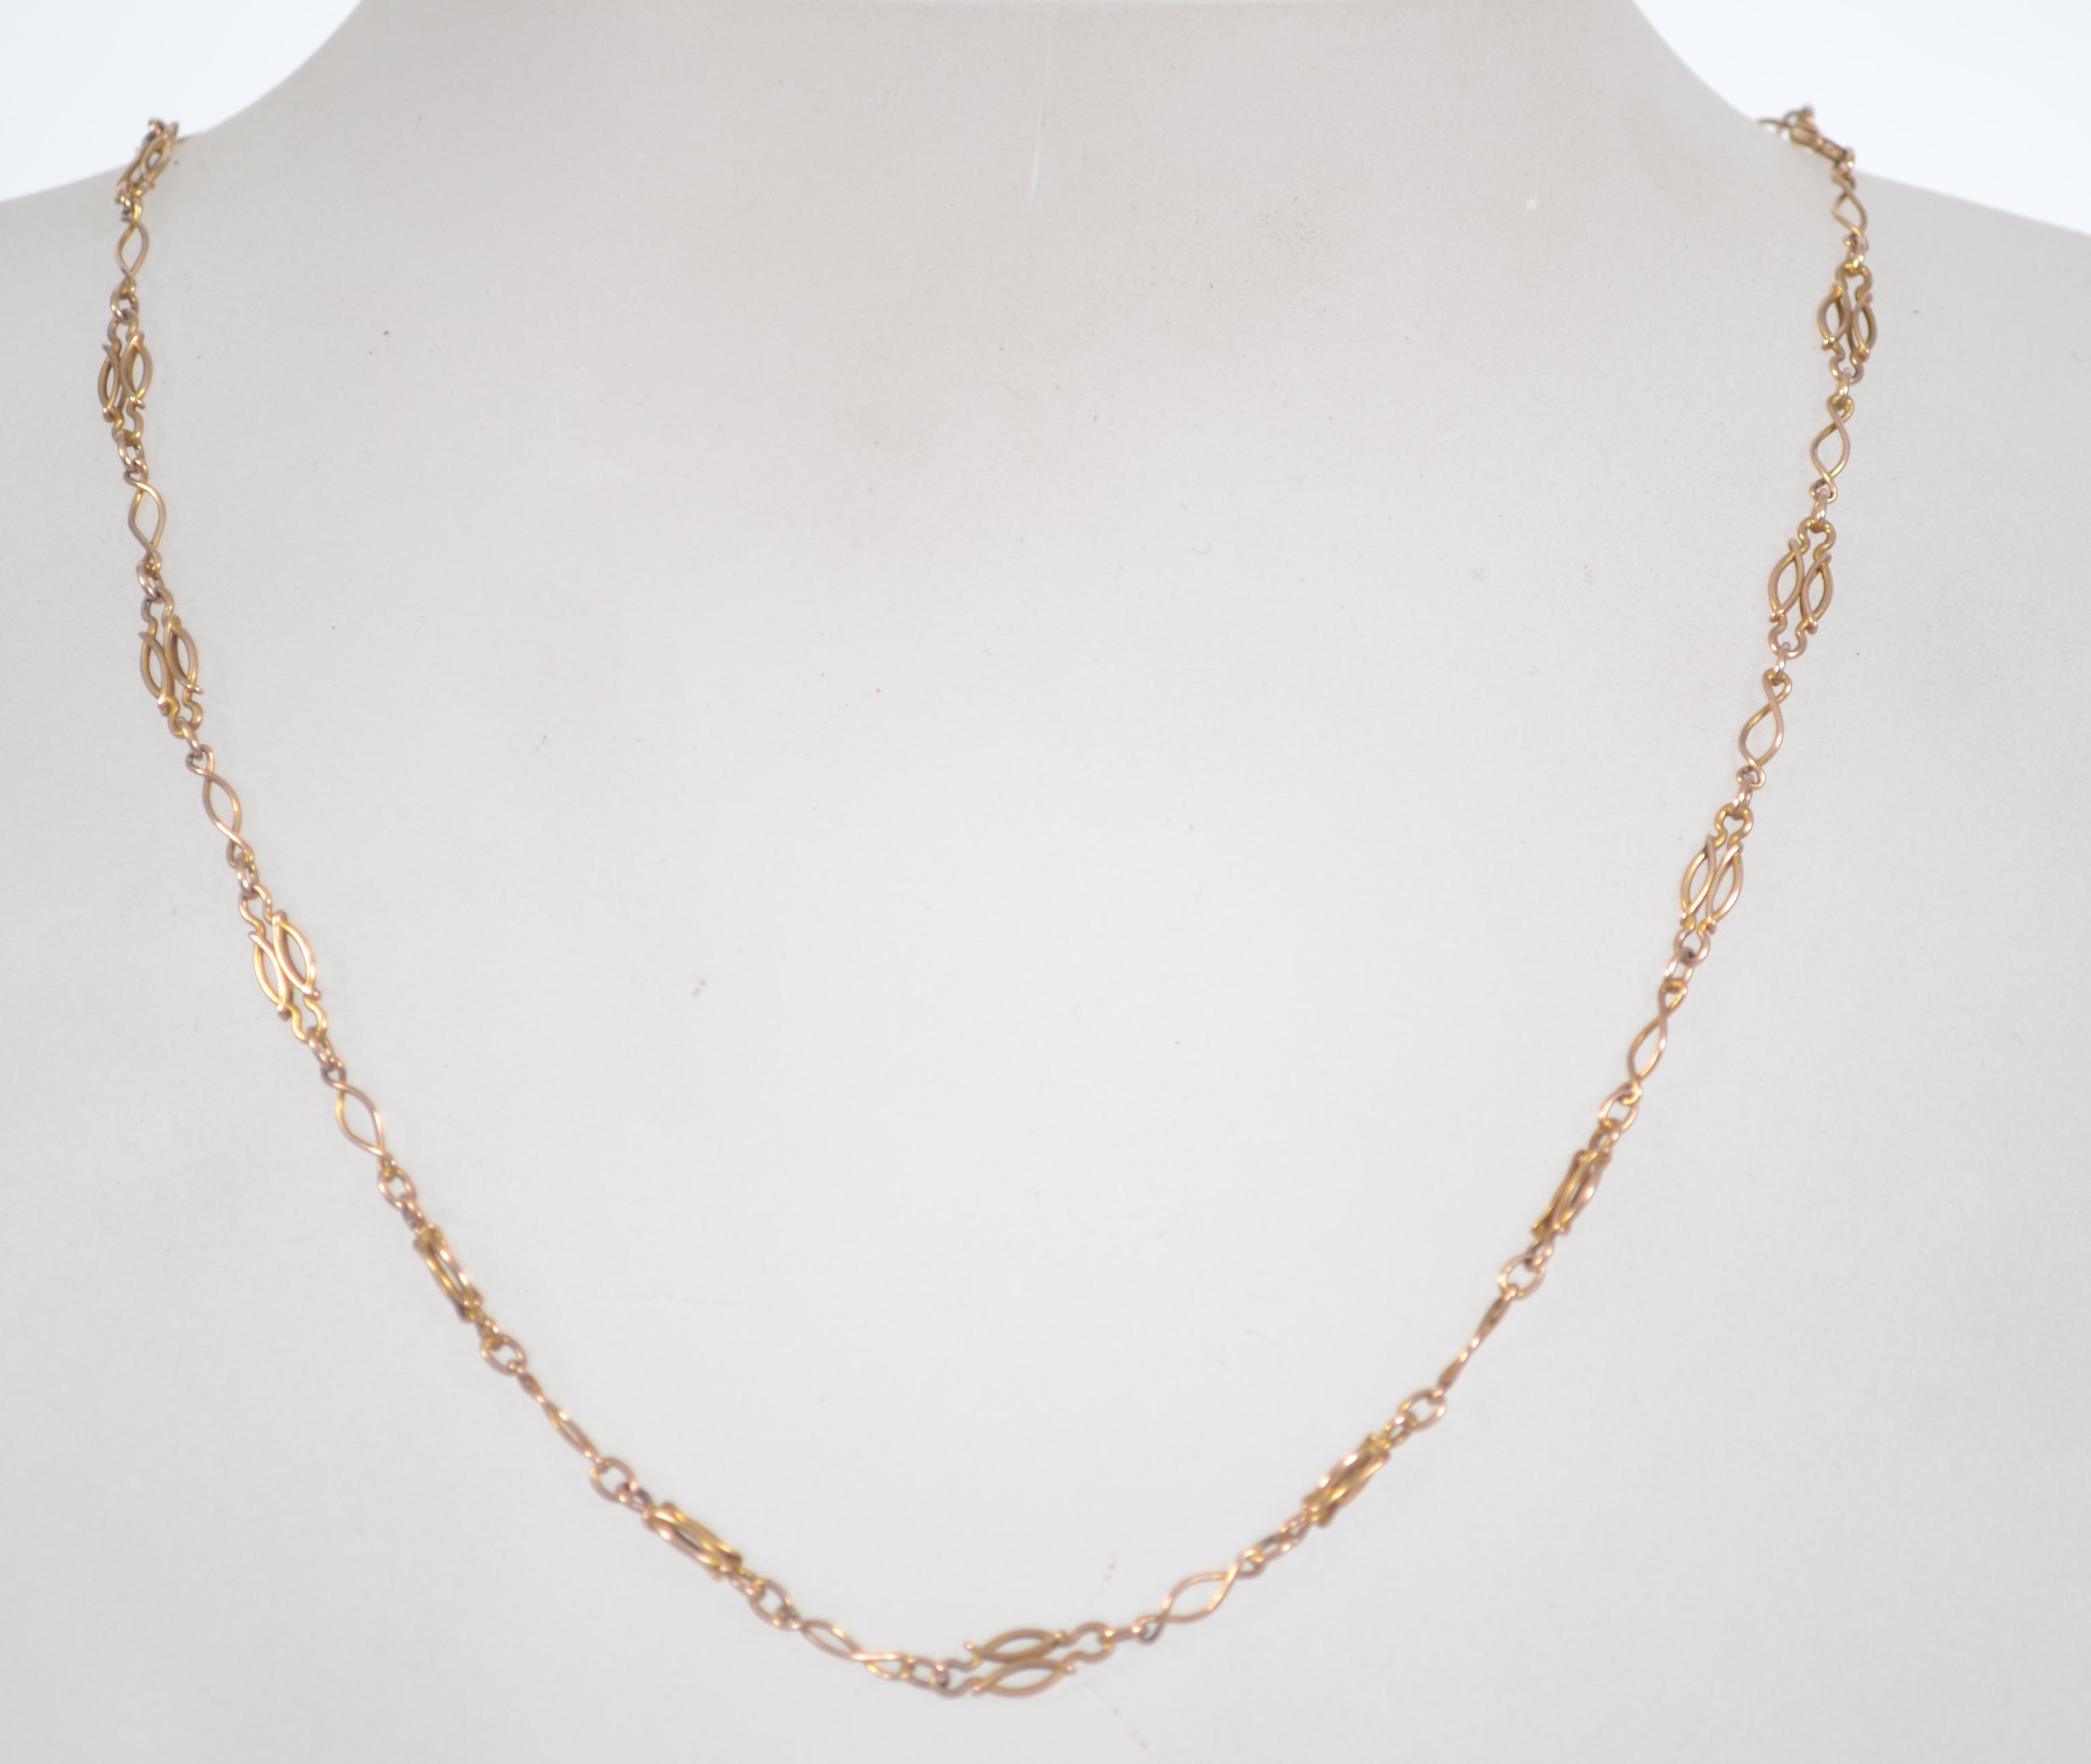 A vintage ladies 9ct gold fancy link necklace with barrel clip clasp. Length 42cms / weight 4.2g.